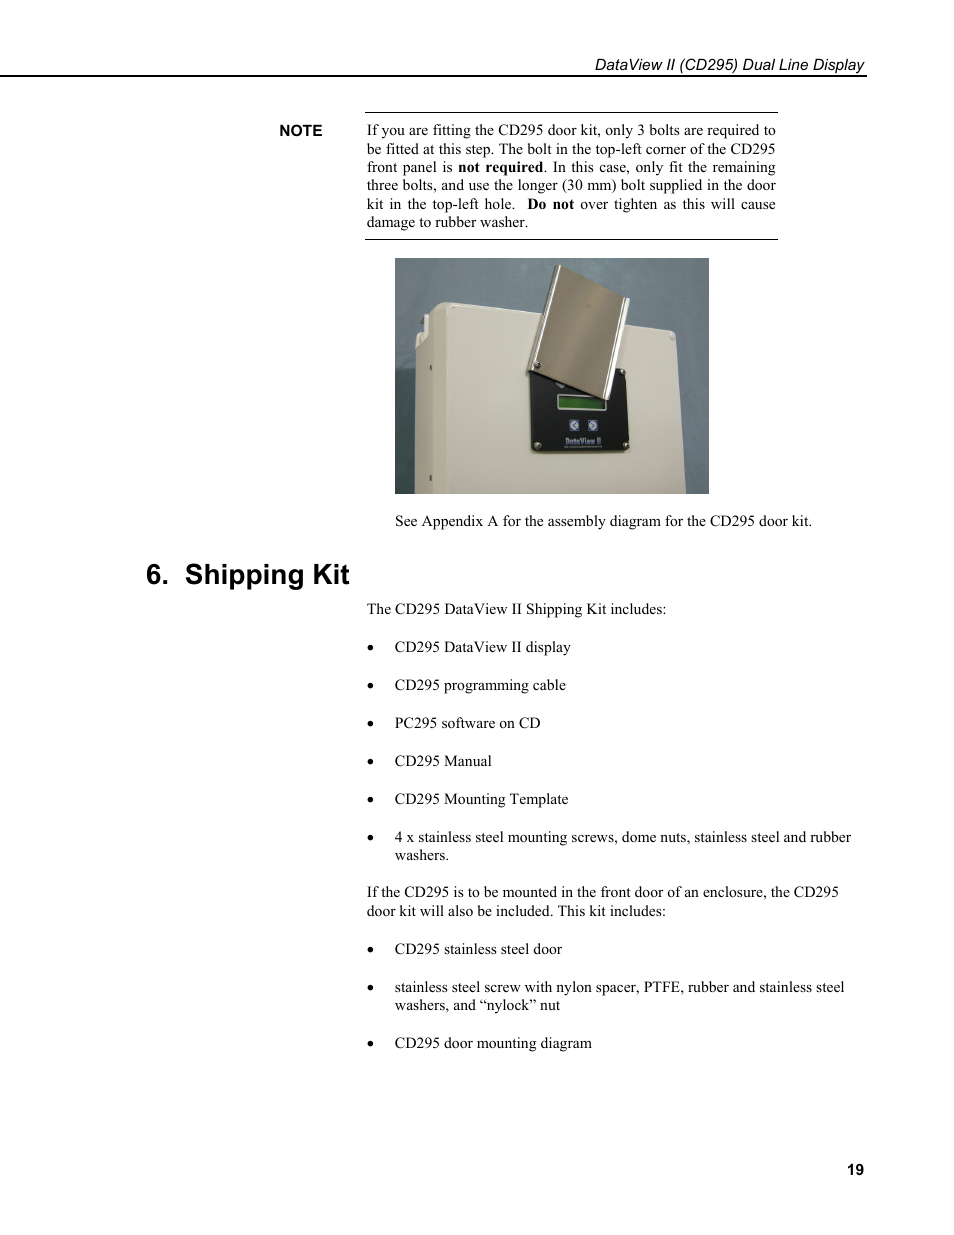 Shipping kit | Campbell Scientific CD295 DataView II Dual Line Display User Manual | Page 23 / 36